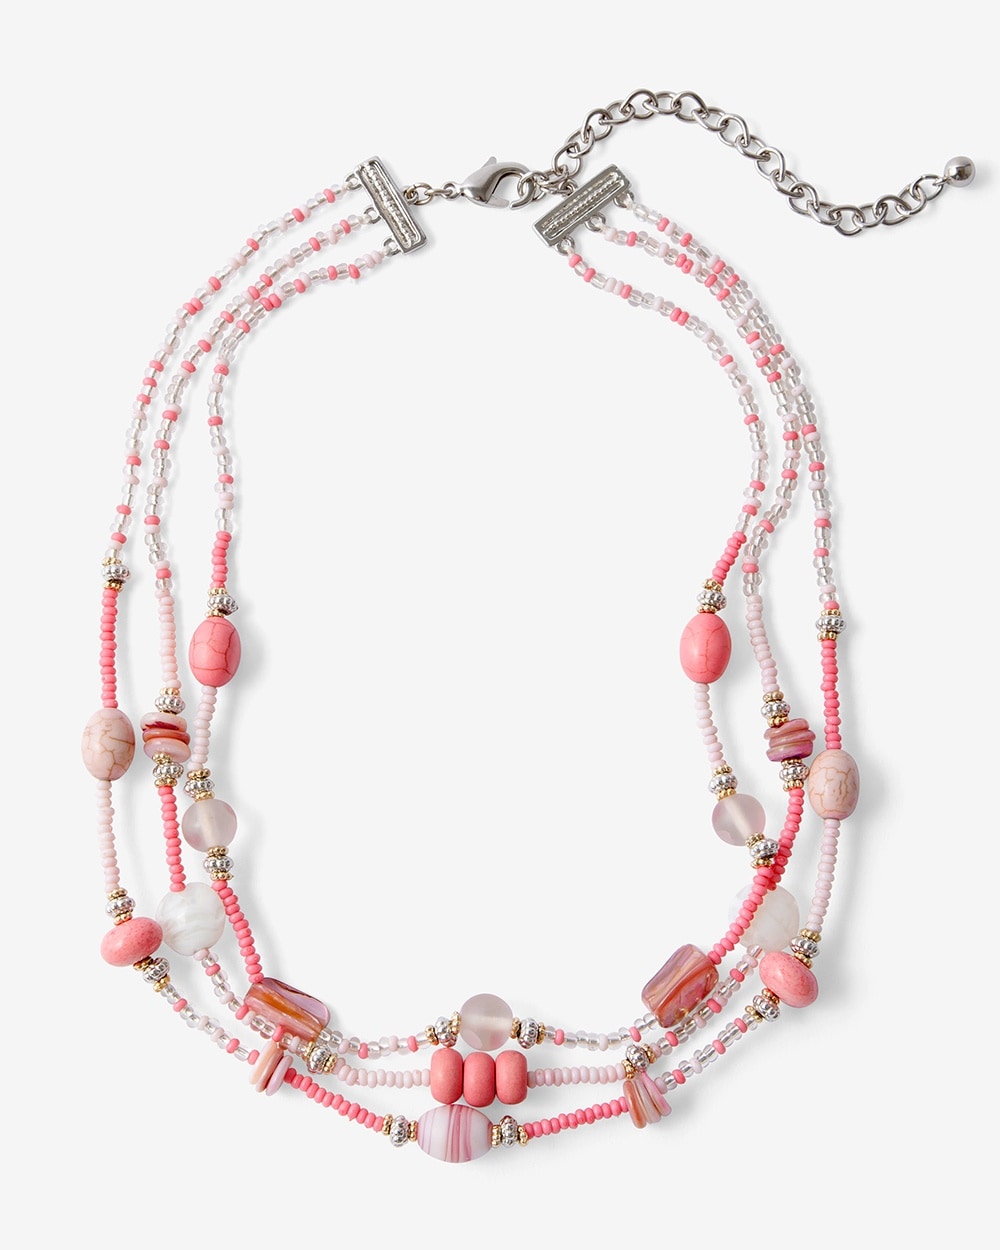 Watermelon Waves Beaded Necklace